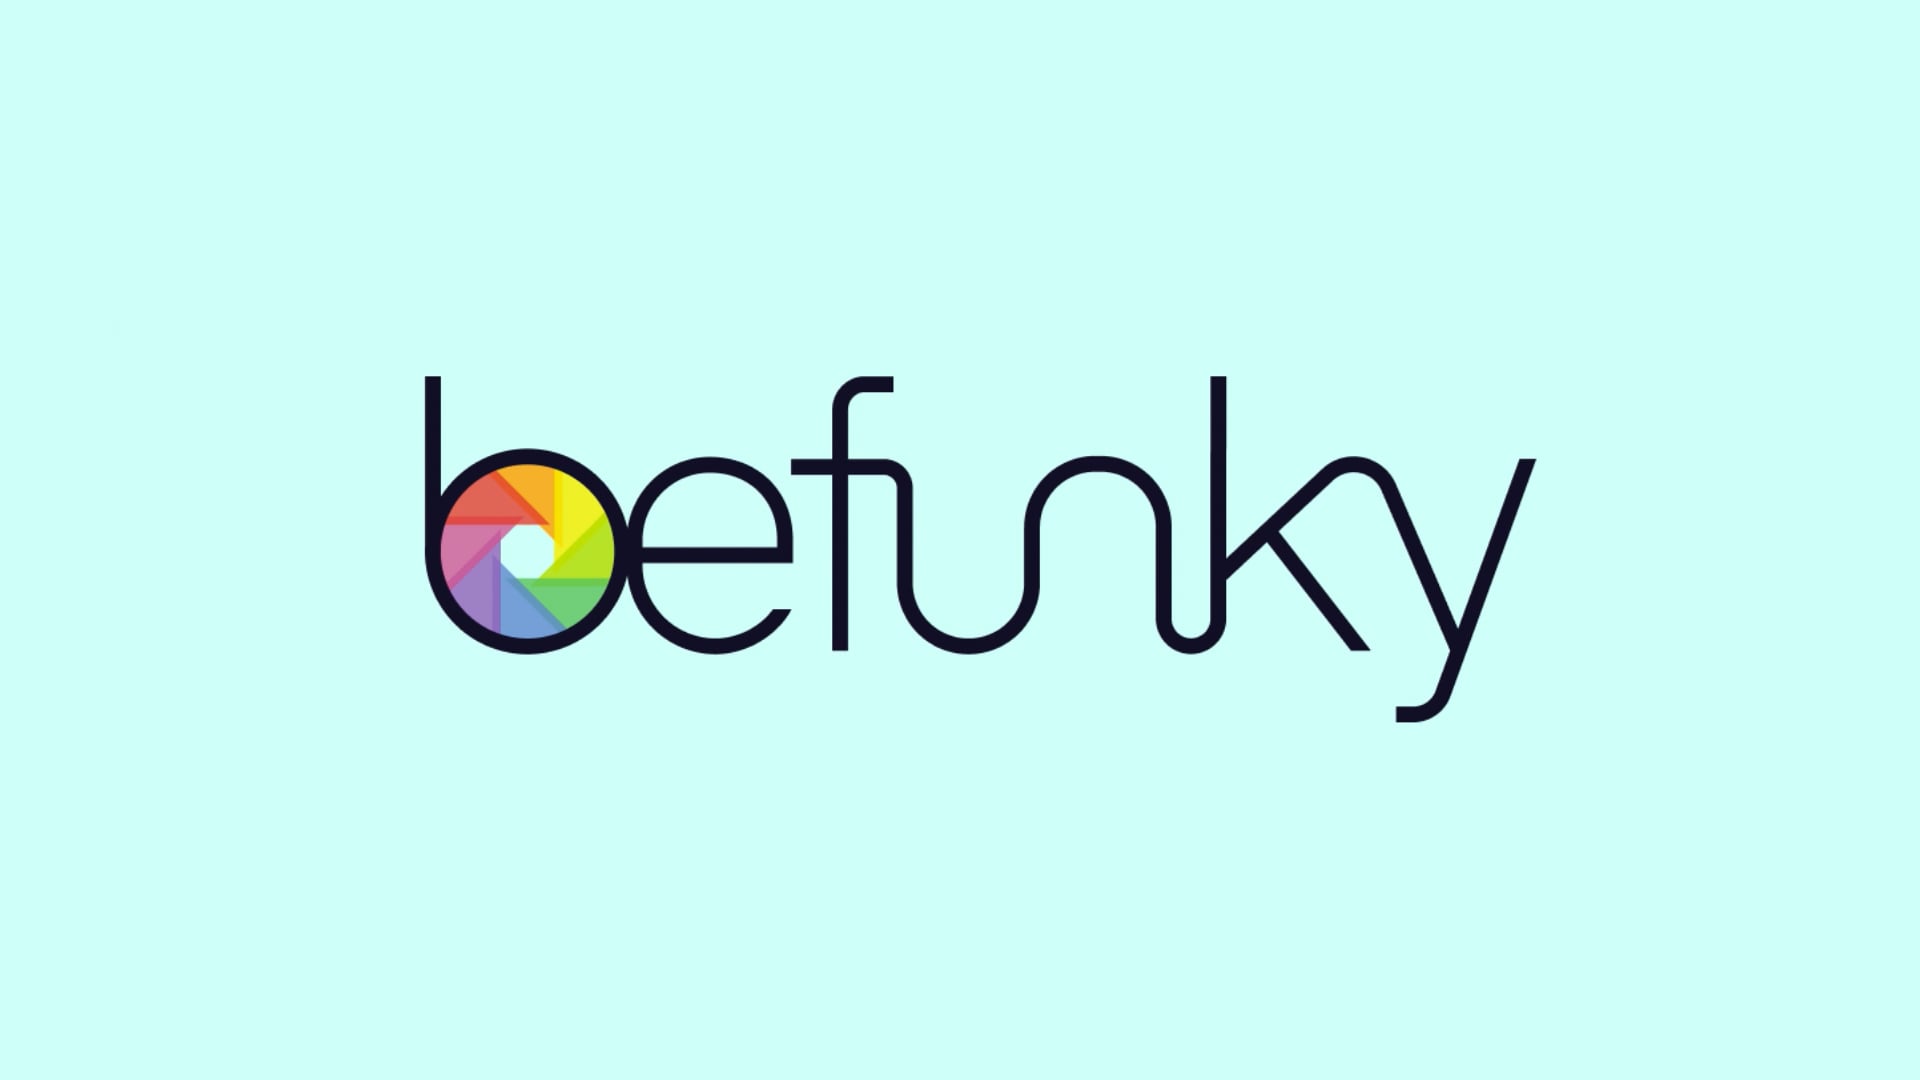 Photo Editor | BeFunky: Free Online Photo Editing and Collage Maker